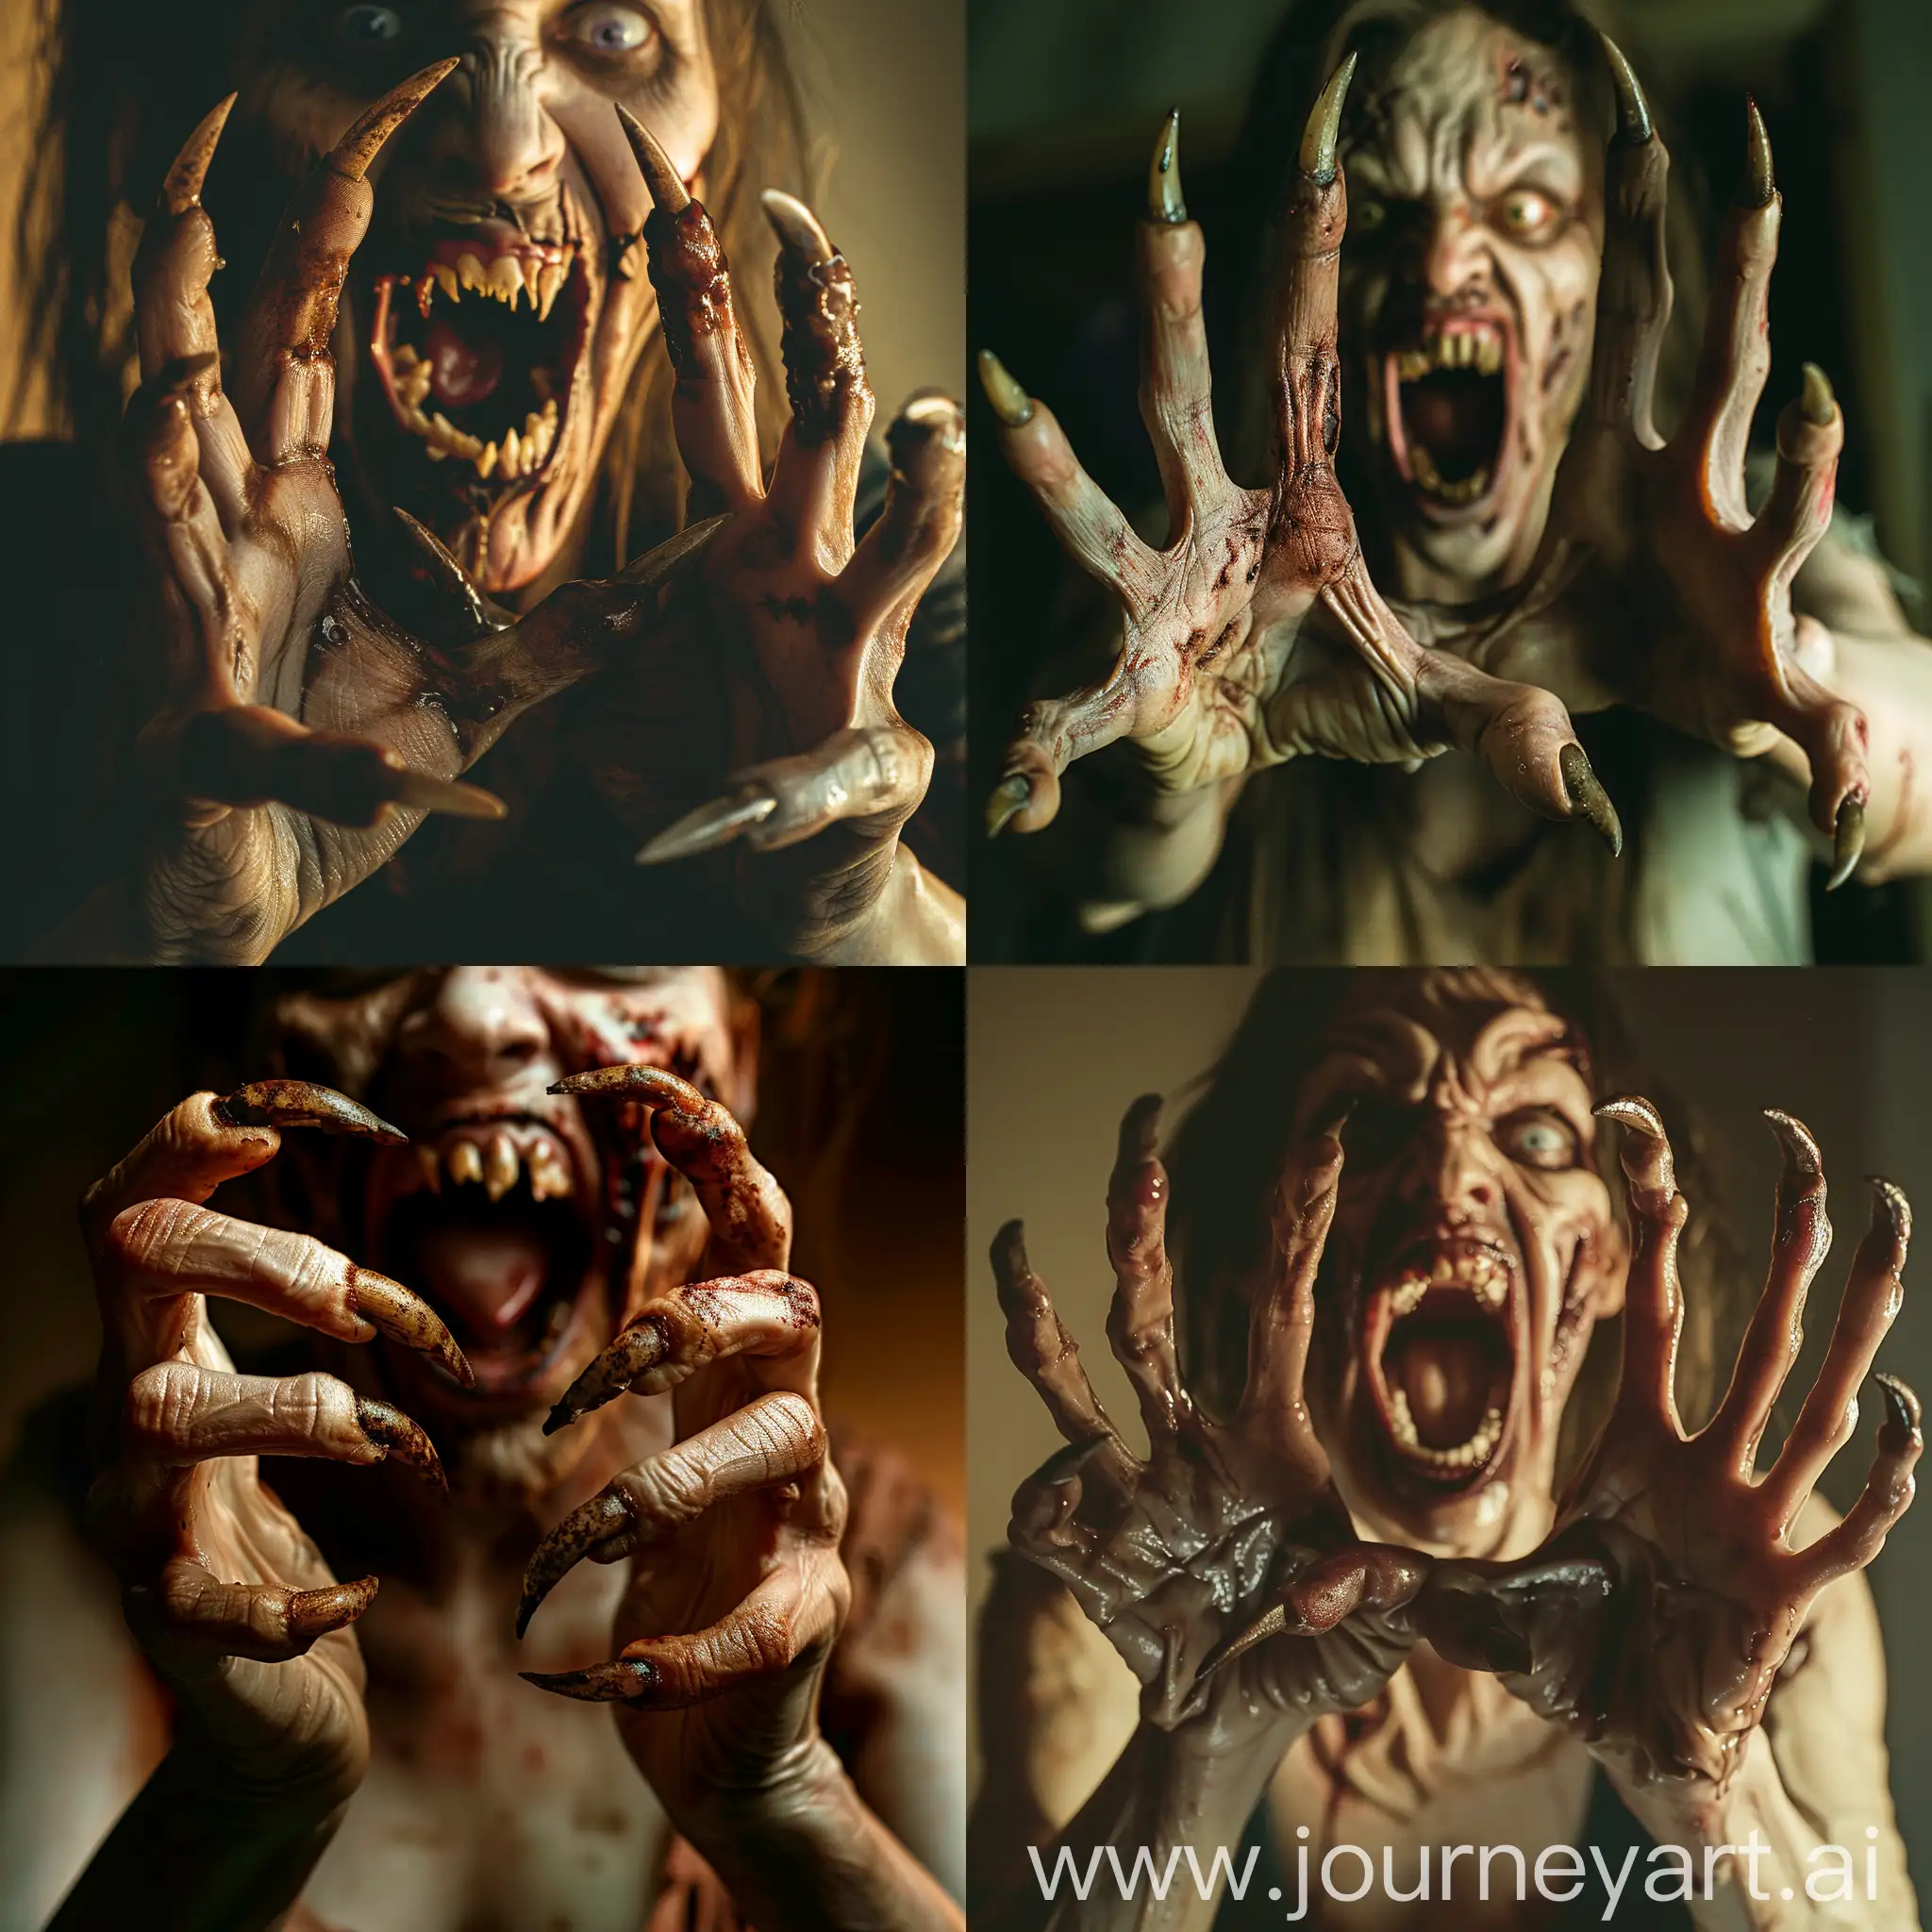 A terrifying and nightmare-inducing image of a zombie woman with long, curved, and pointed, dirty nails protruding from her five fingers, reminiscent of menacing claws. Her mouth is widely open, revealing a row of sharp, pointed teeth that look like fangs. She has her two hands out in front of her, and she slowly approaches her target in order to fulfill her insatiable hunger.  32k uhd, full anatomical. human hands, very clear without flaws with five fingers
